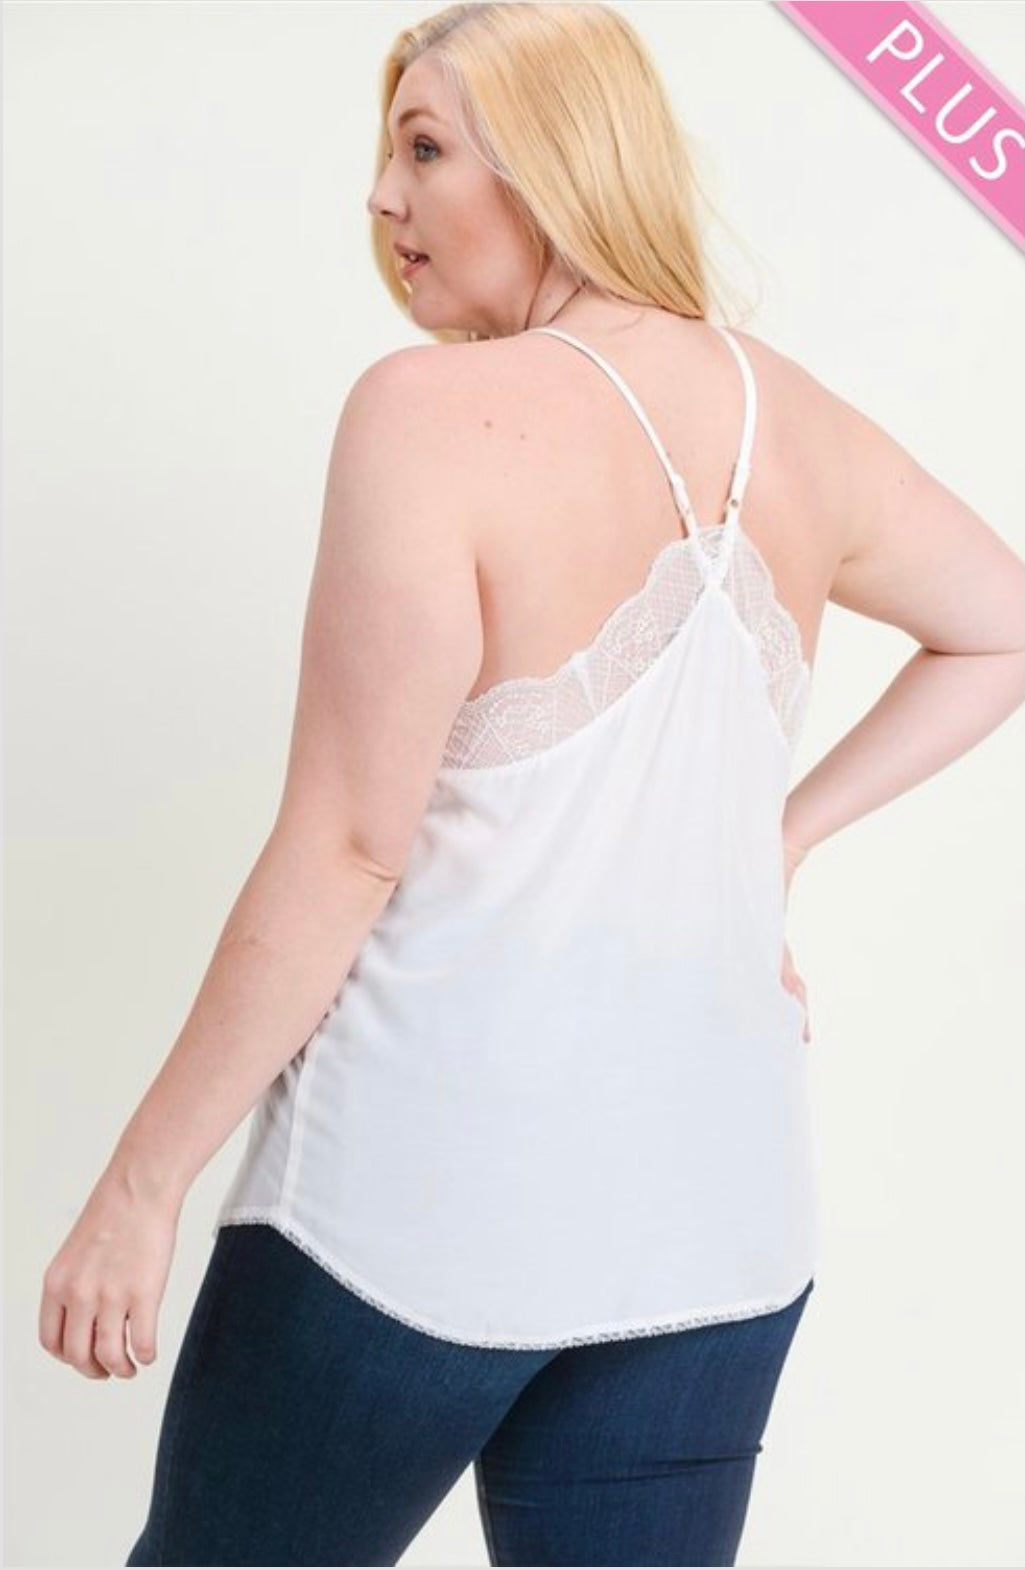 Raine Racerback Cami Plus - Corinne Boutique Family Owned and Operated USA